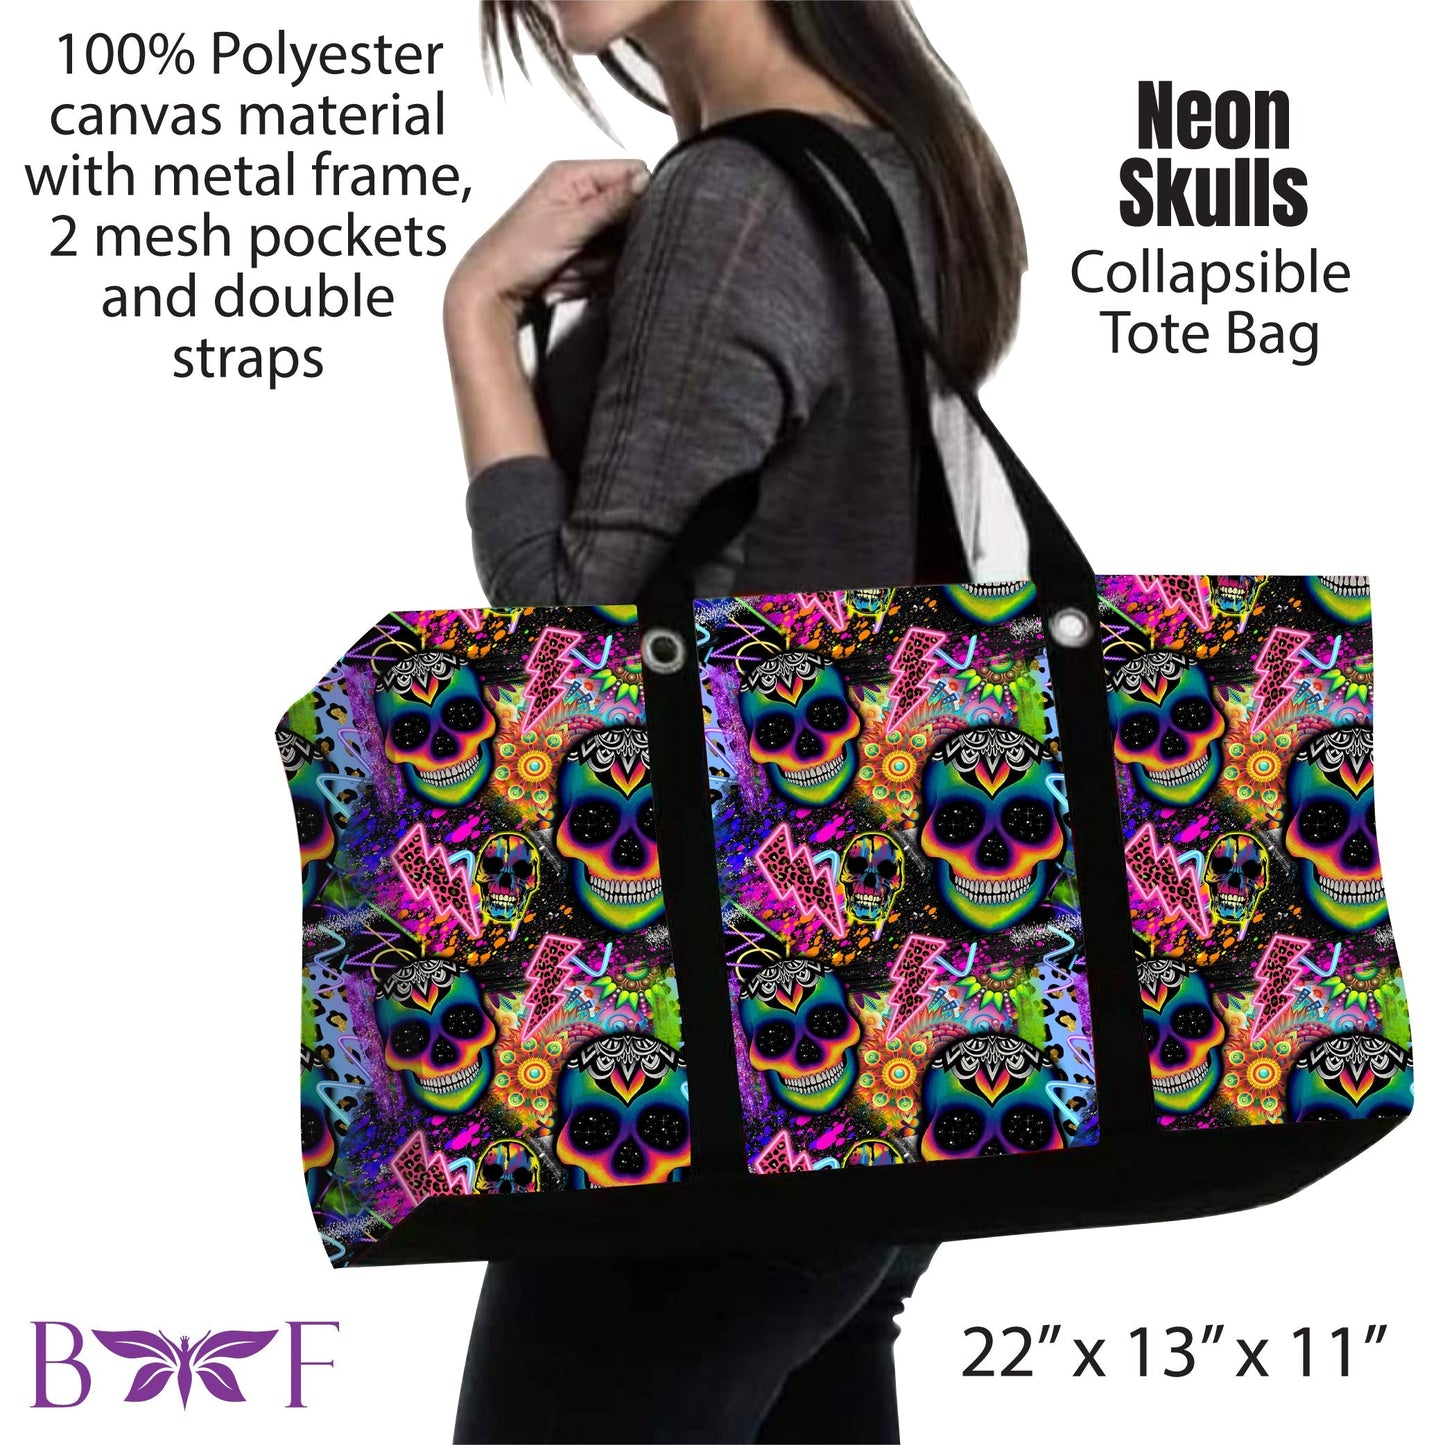 Neon Skulls Tote with 2 mesh pockets